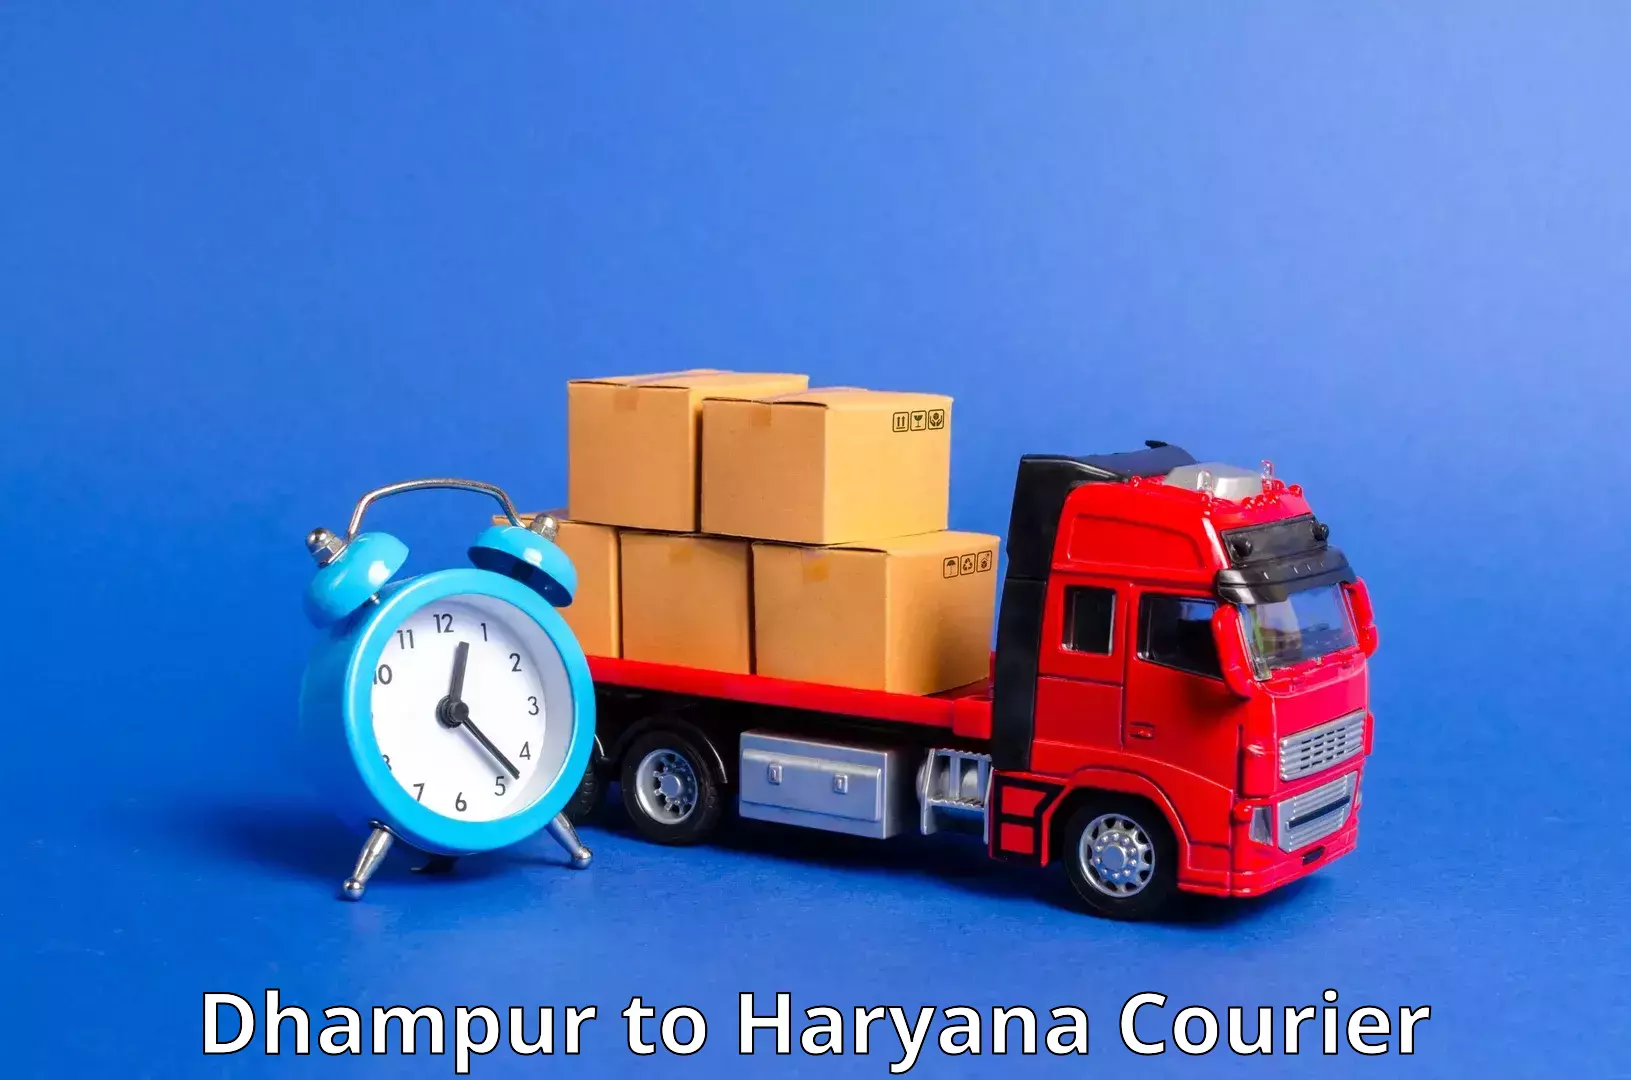 Fast delivery service Dhampur to Bahadurgarh